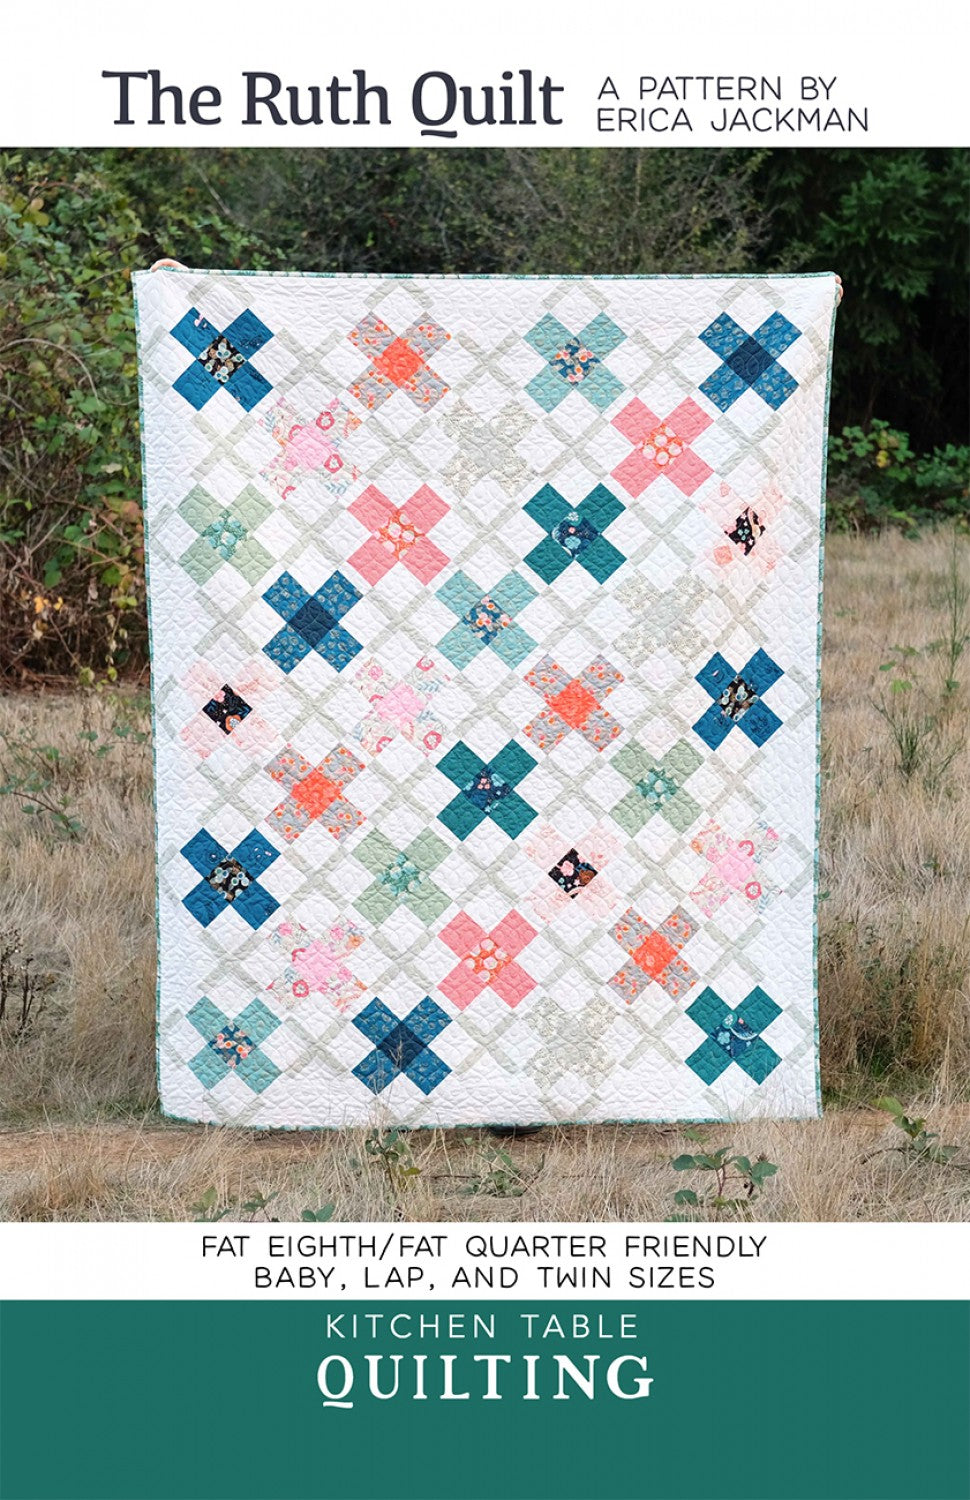 The Ruth Quilt Pattern